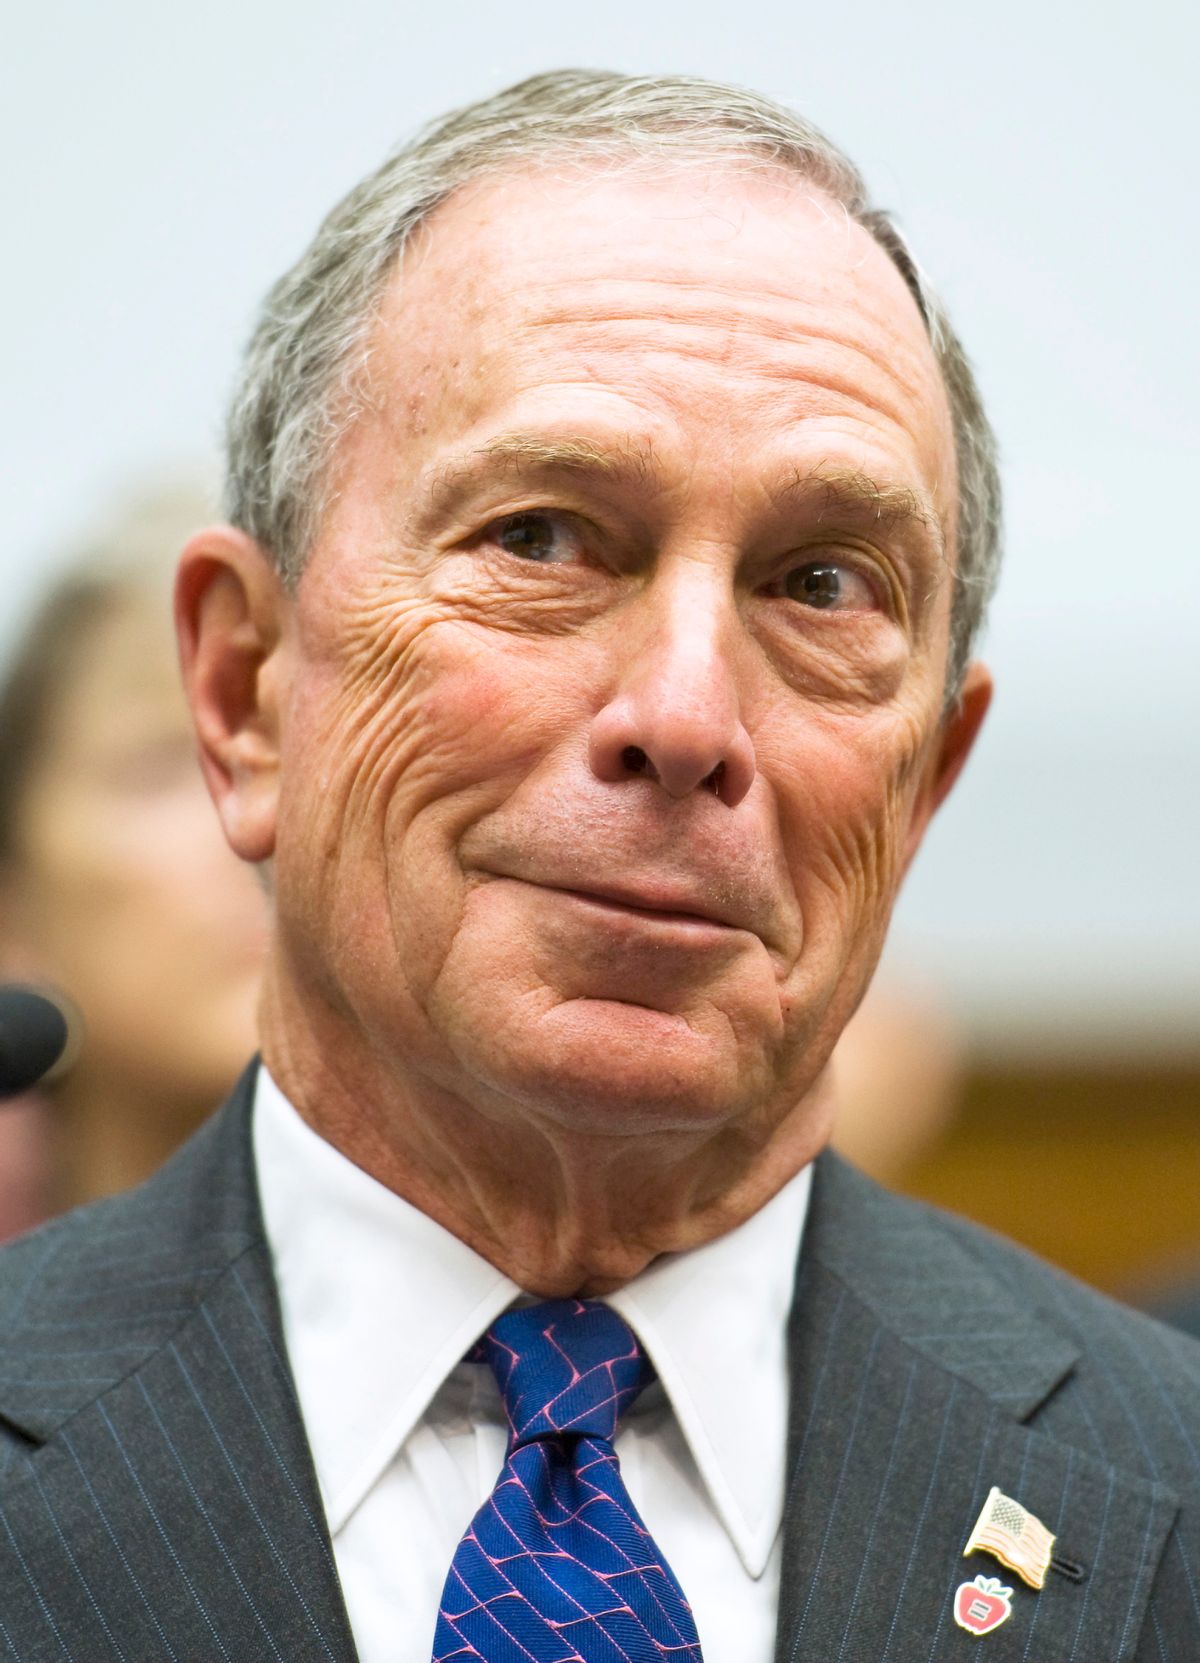 New York Mayor Michael Bloomberg testifies on Capitol Hill  Washington, Thursday, Sept. 30, 2010,  before the House Immigration, Citizenship, Refugee, Border Security, and International Law subcommittee hearing on the role of immigration in strengthening America's economy. (AP Photo/Cliff Owen) (Cliff Owen)